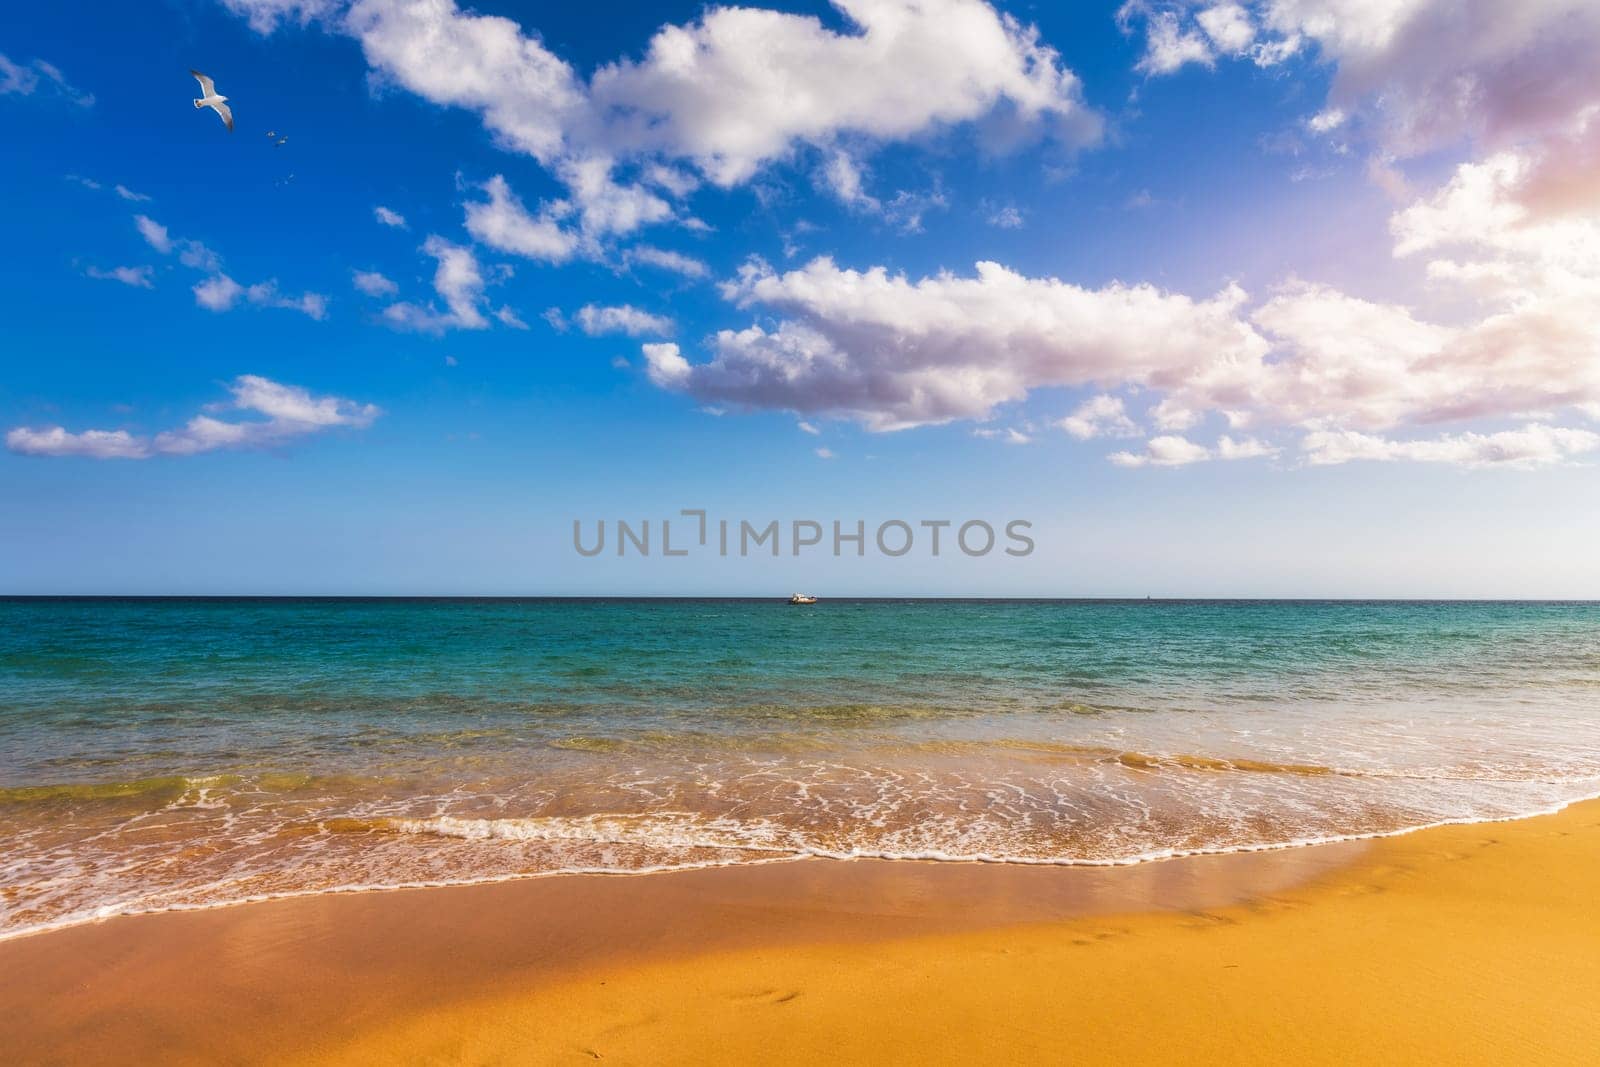 View on the beach Sotavento with golden sand and crystal sea water of amazing colors on Costa Calma on the Canary Island Fuerteventura, Spain. Beach Playa de Sotavento, Canary Island, Fuerteventura. by DaLiu